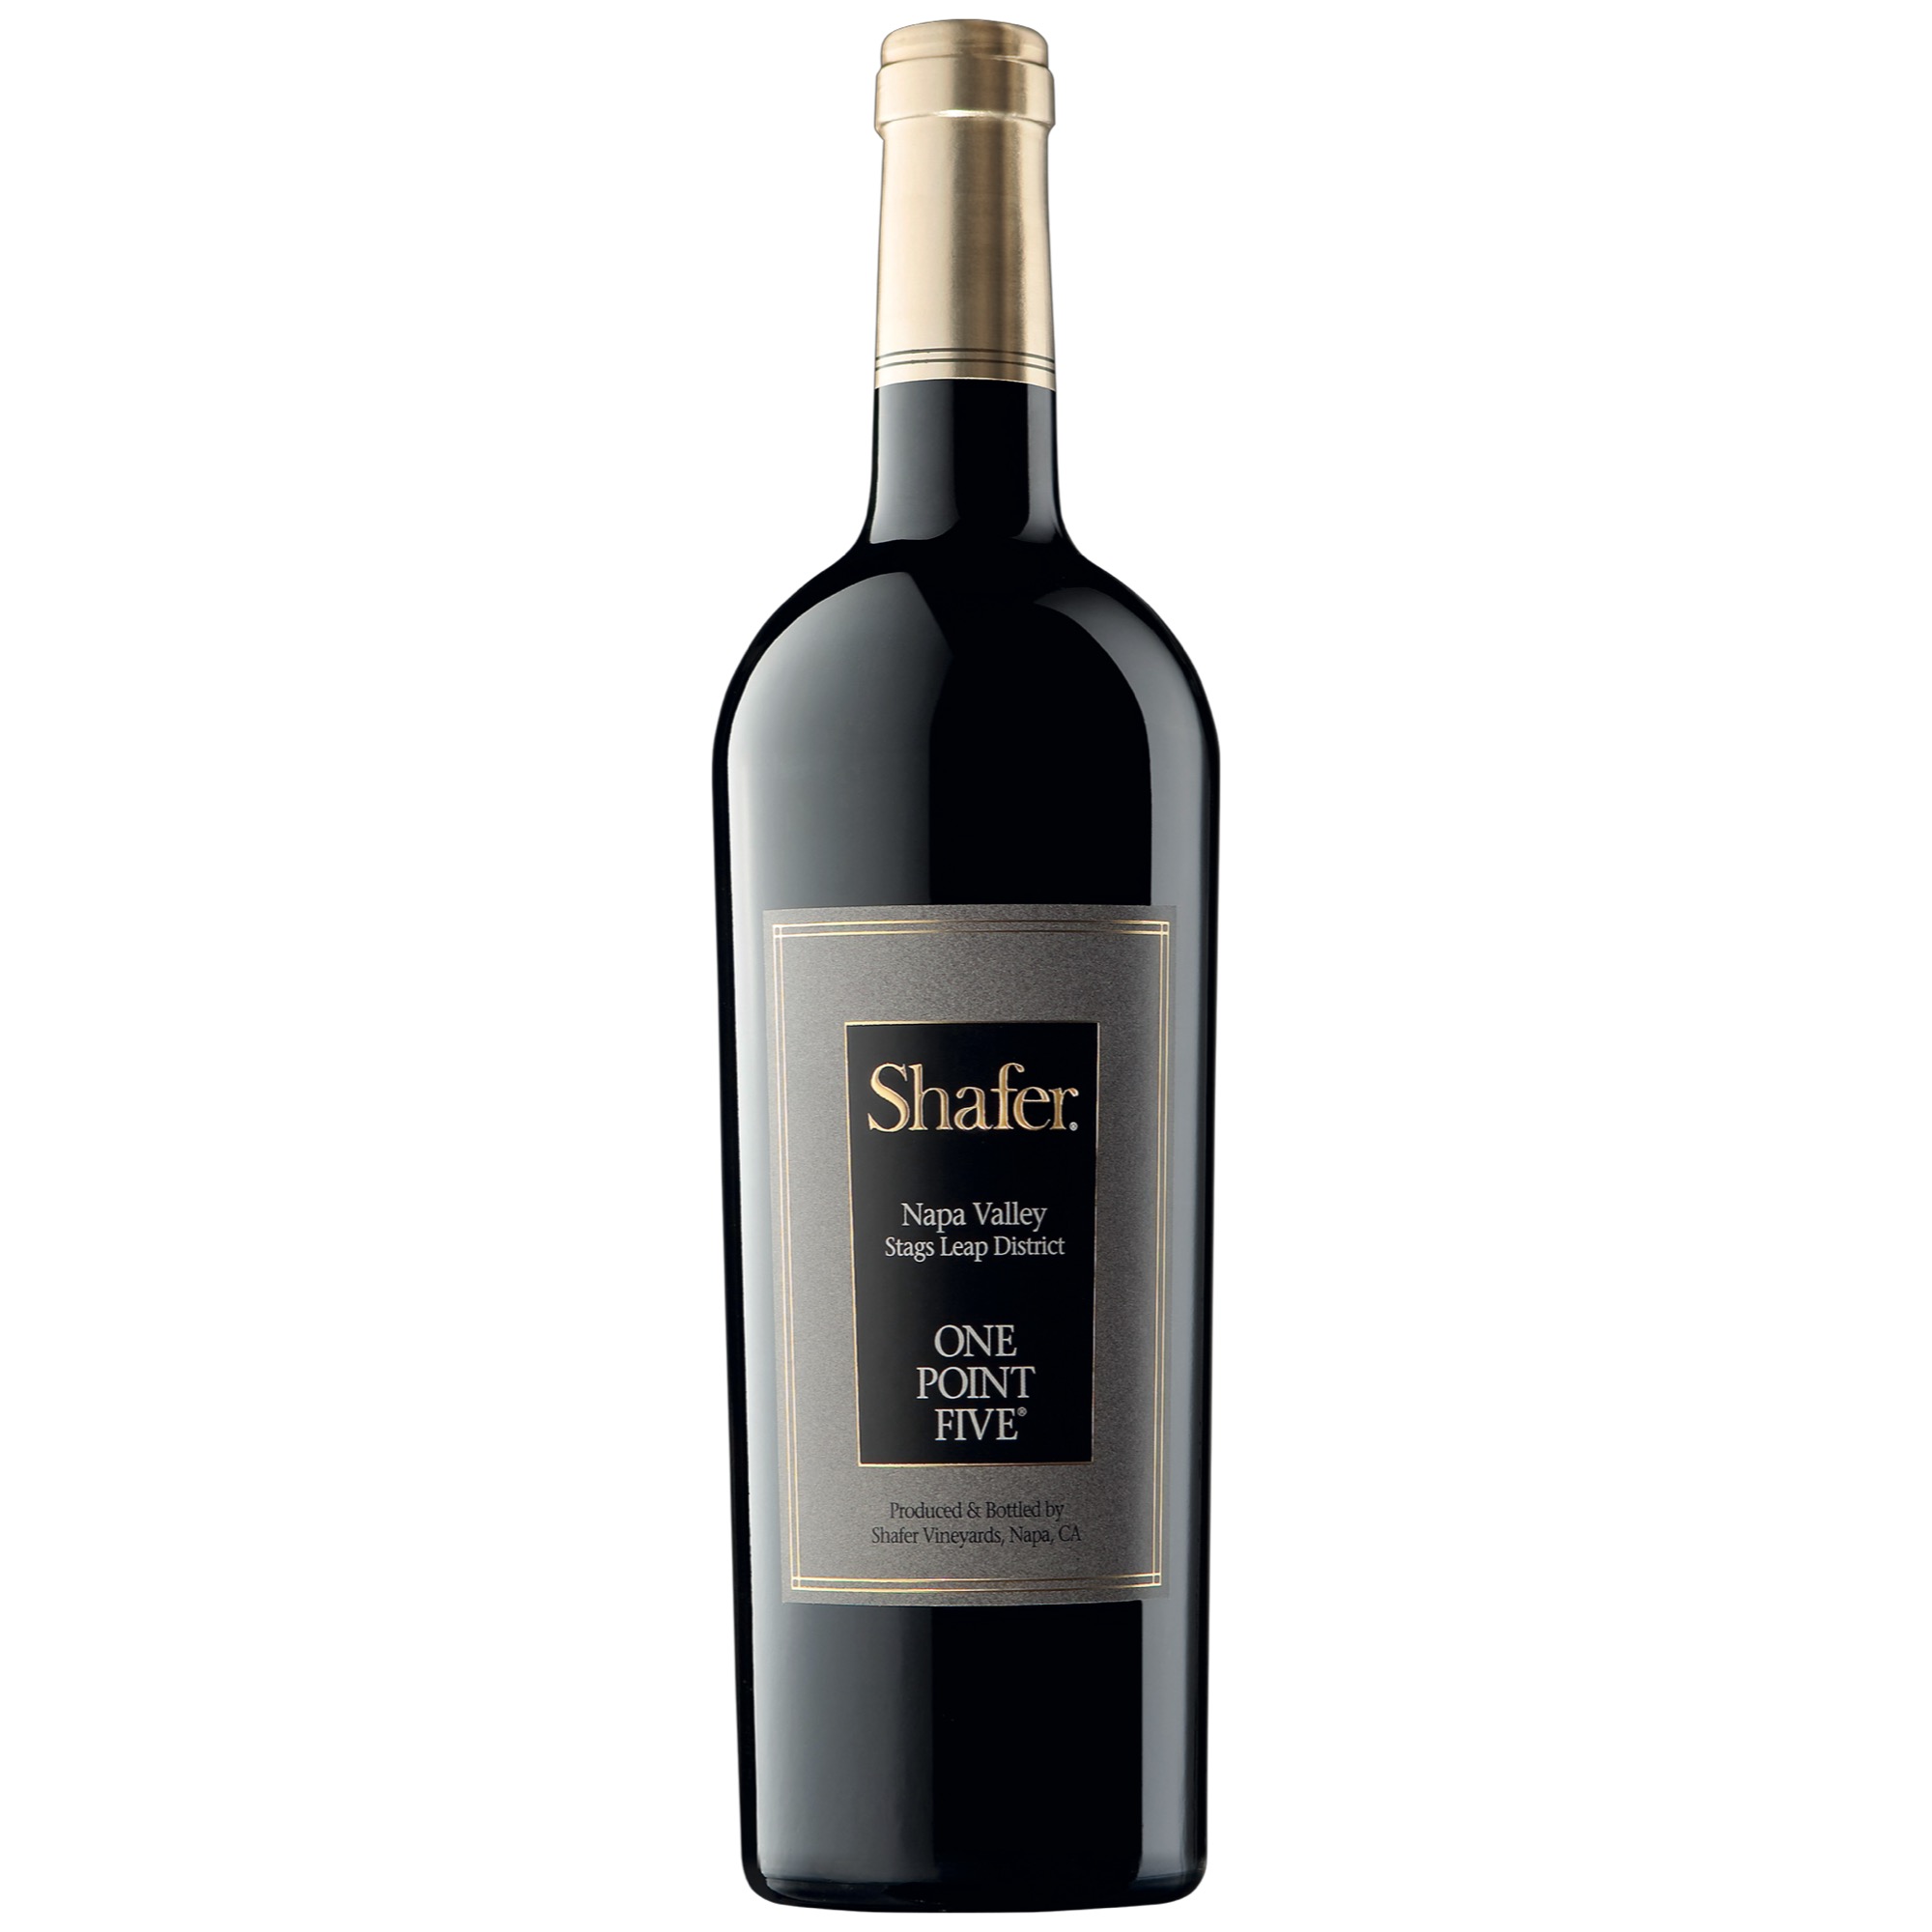 Shafer One Point Five 0,75l, 2014